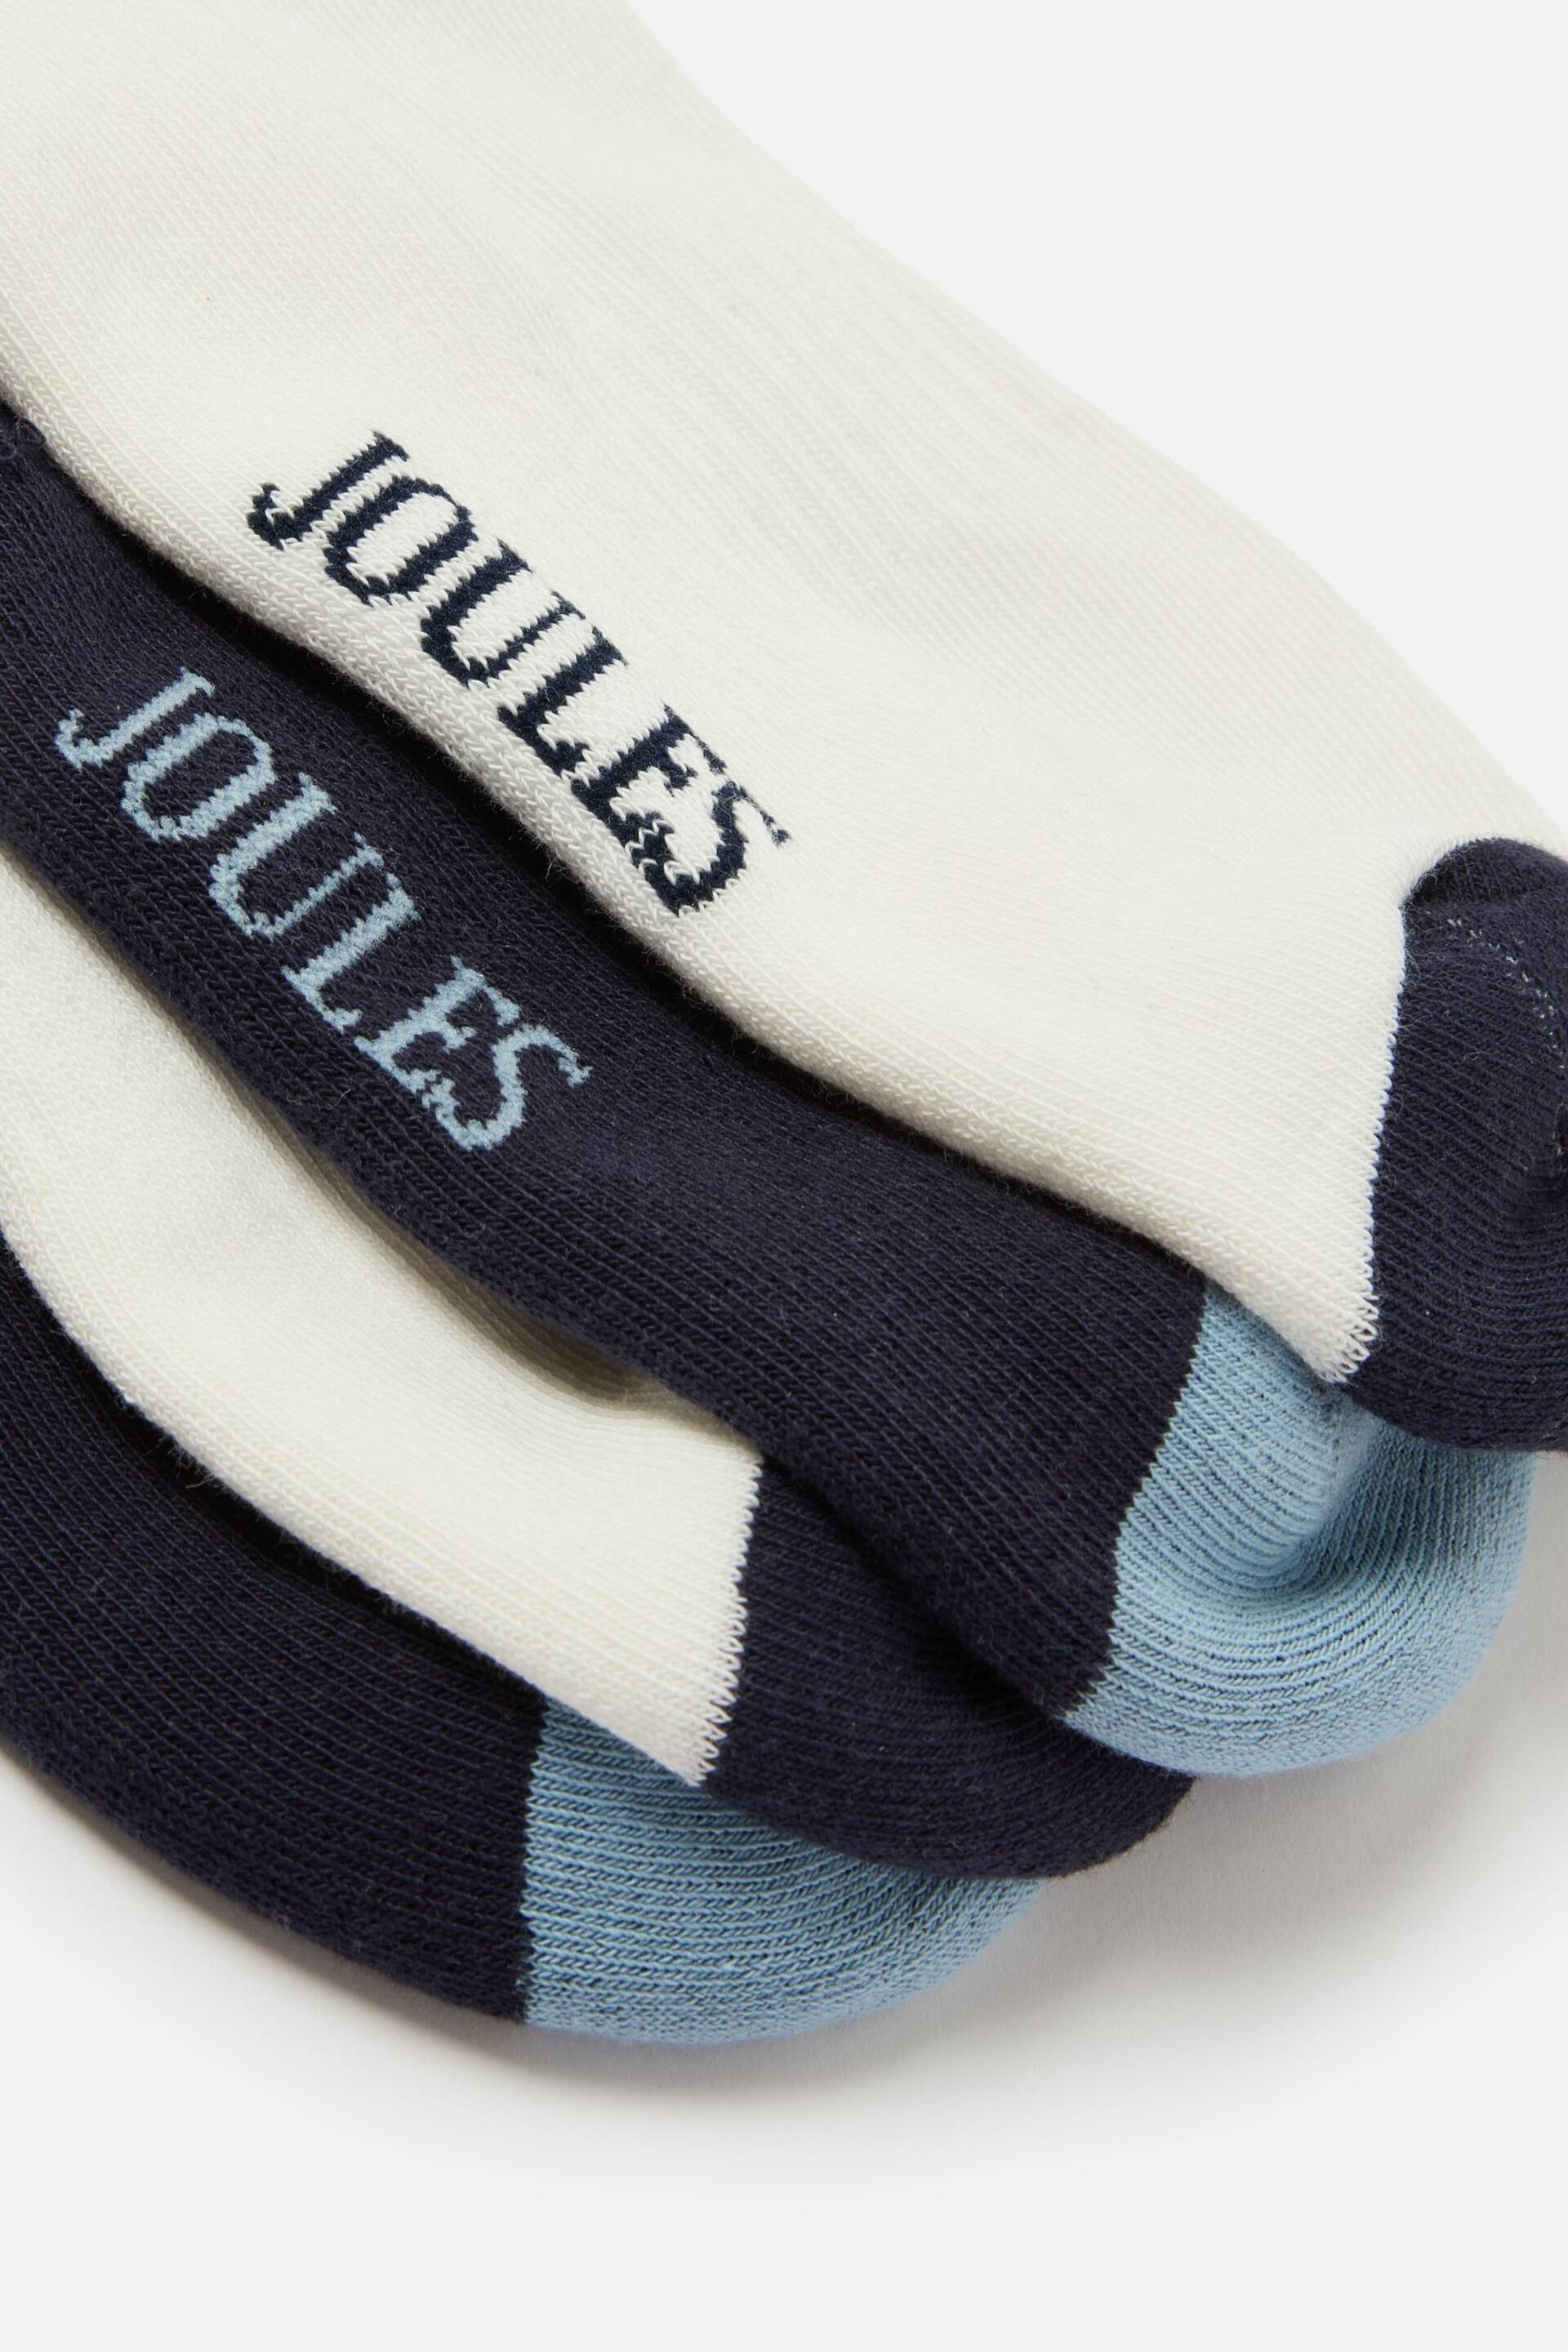 Joules Volley White/Blue Tennis Socks 2PK - Image 5 of 5